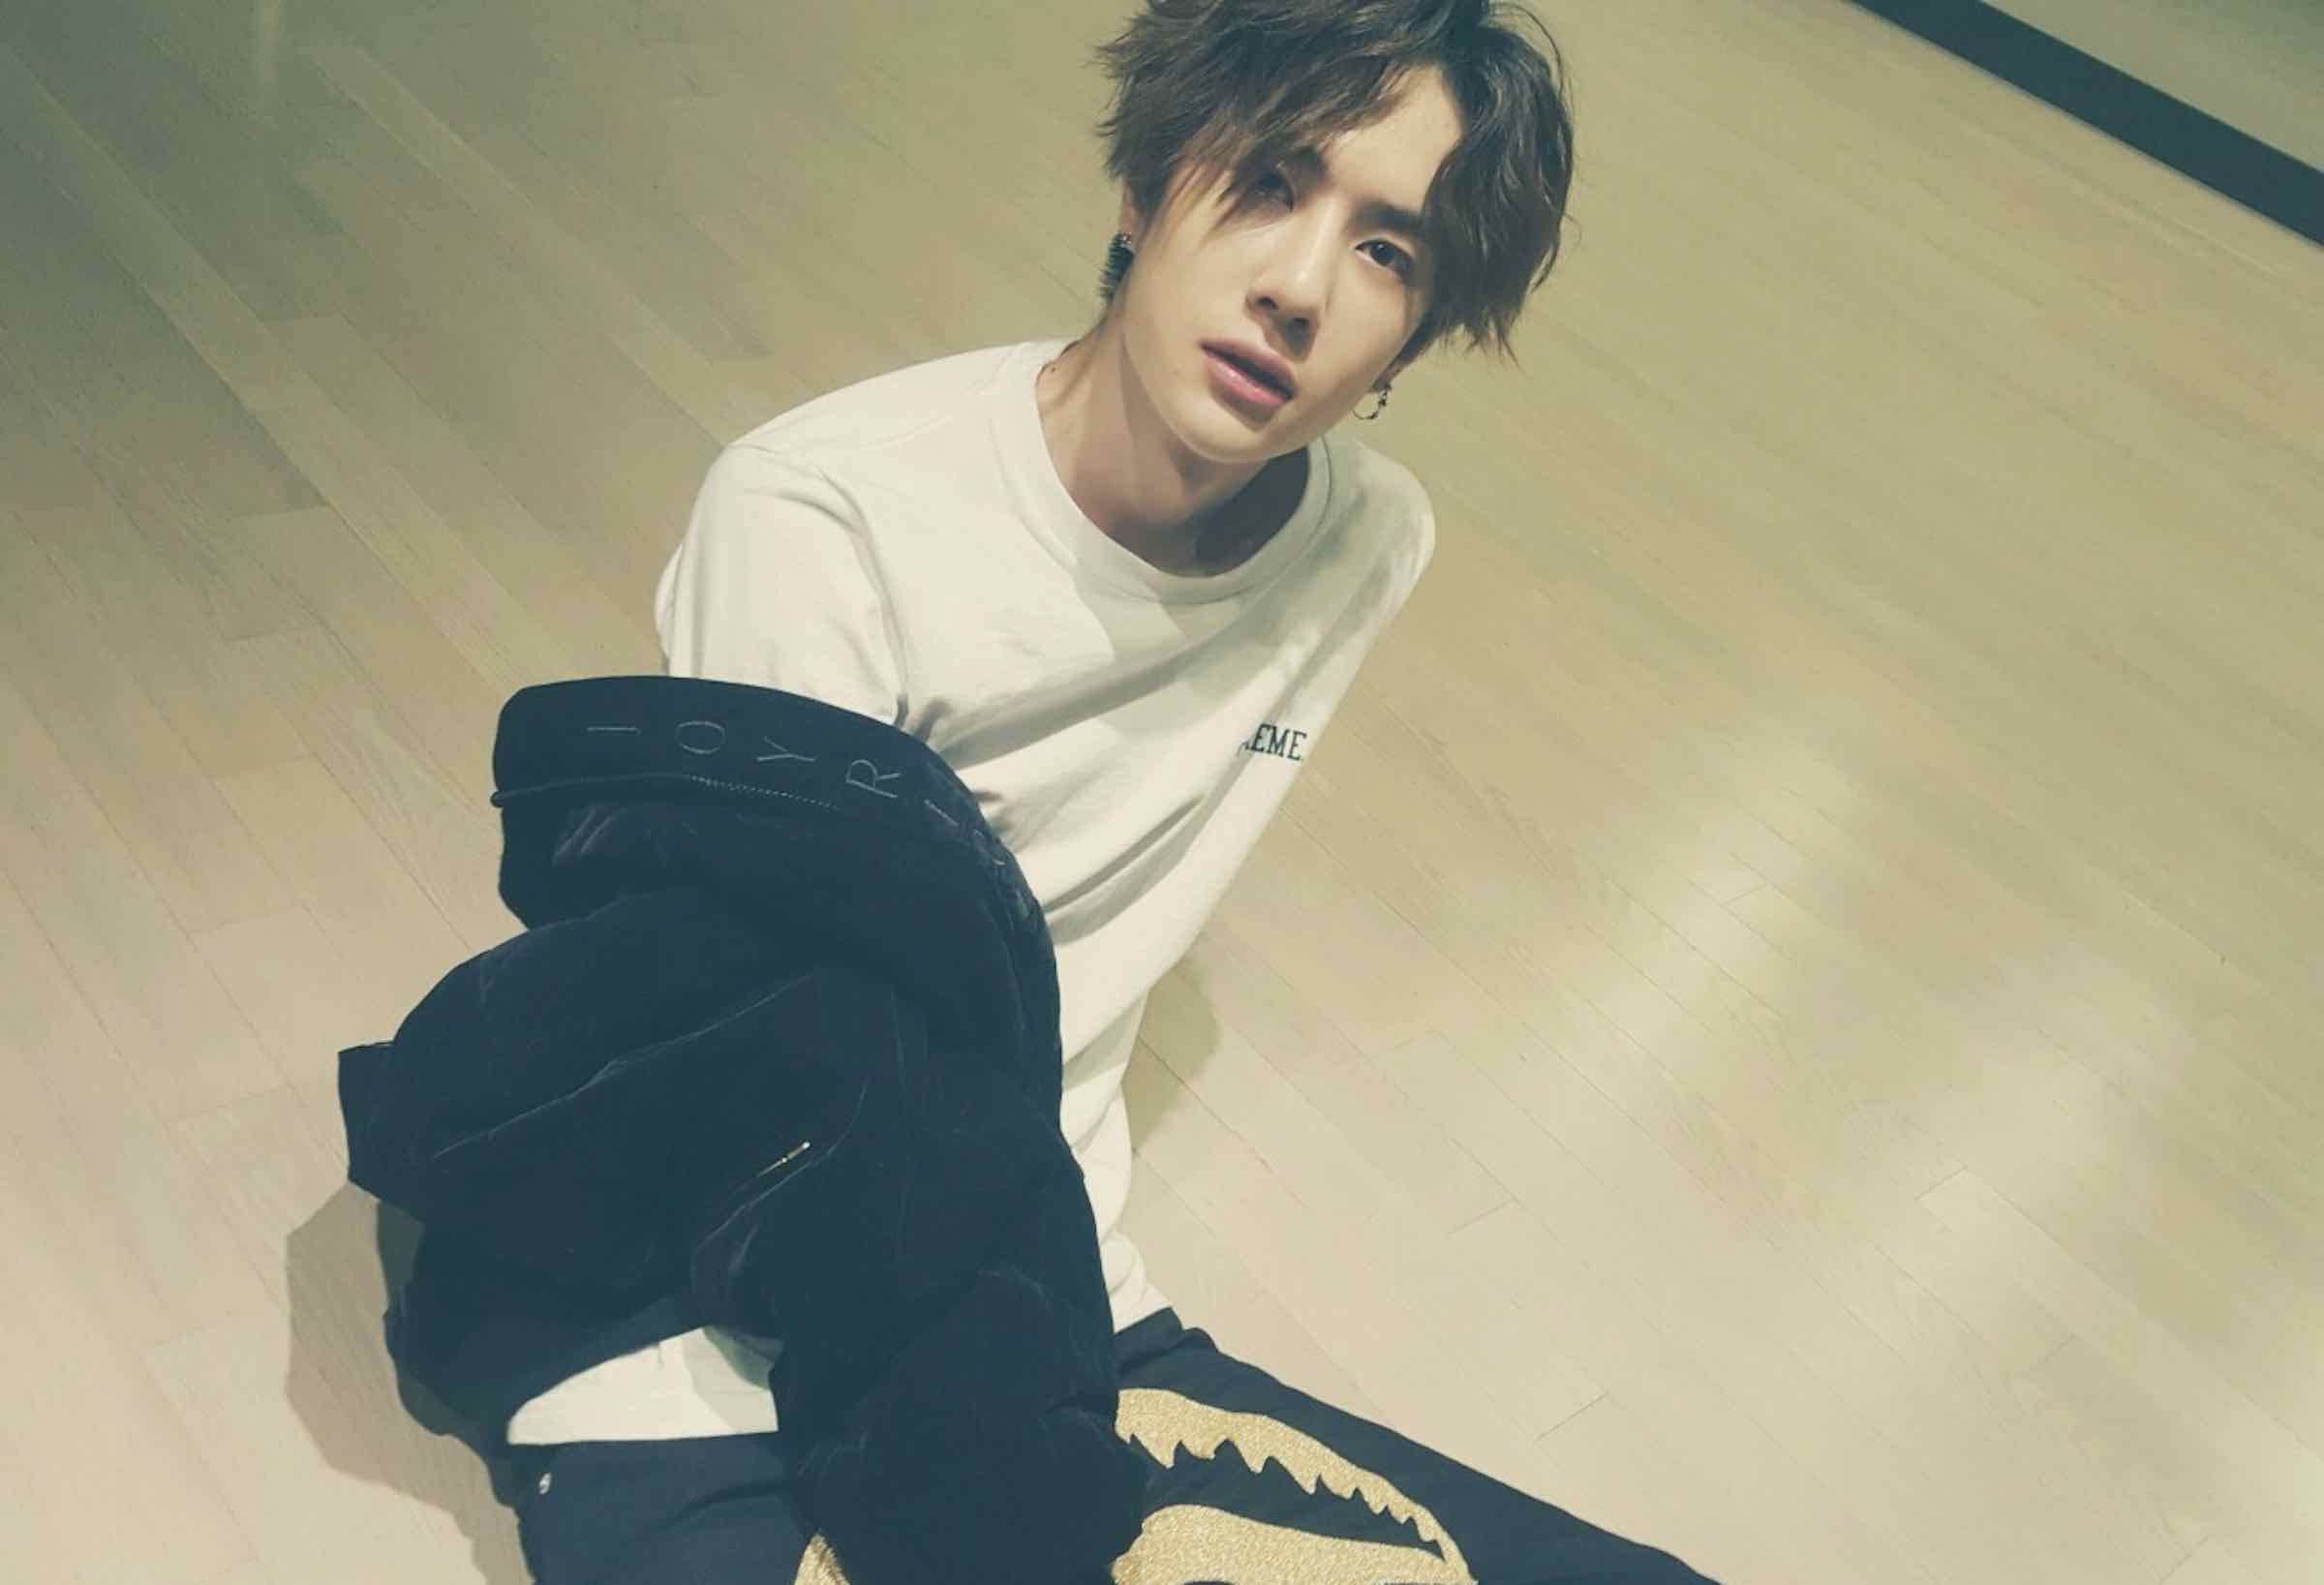 Let’s take a trip to the past and talk about the highlights of Yibo’s career with UNIQ. Here's everything to know about Wang Yibo and UNIQ.